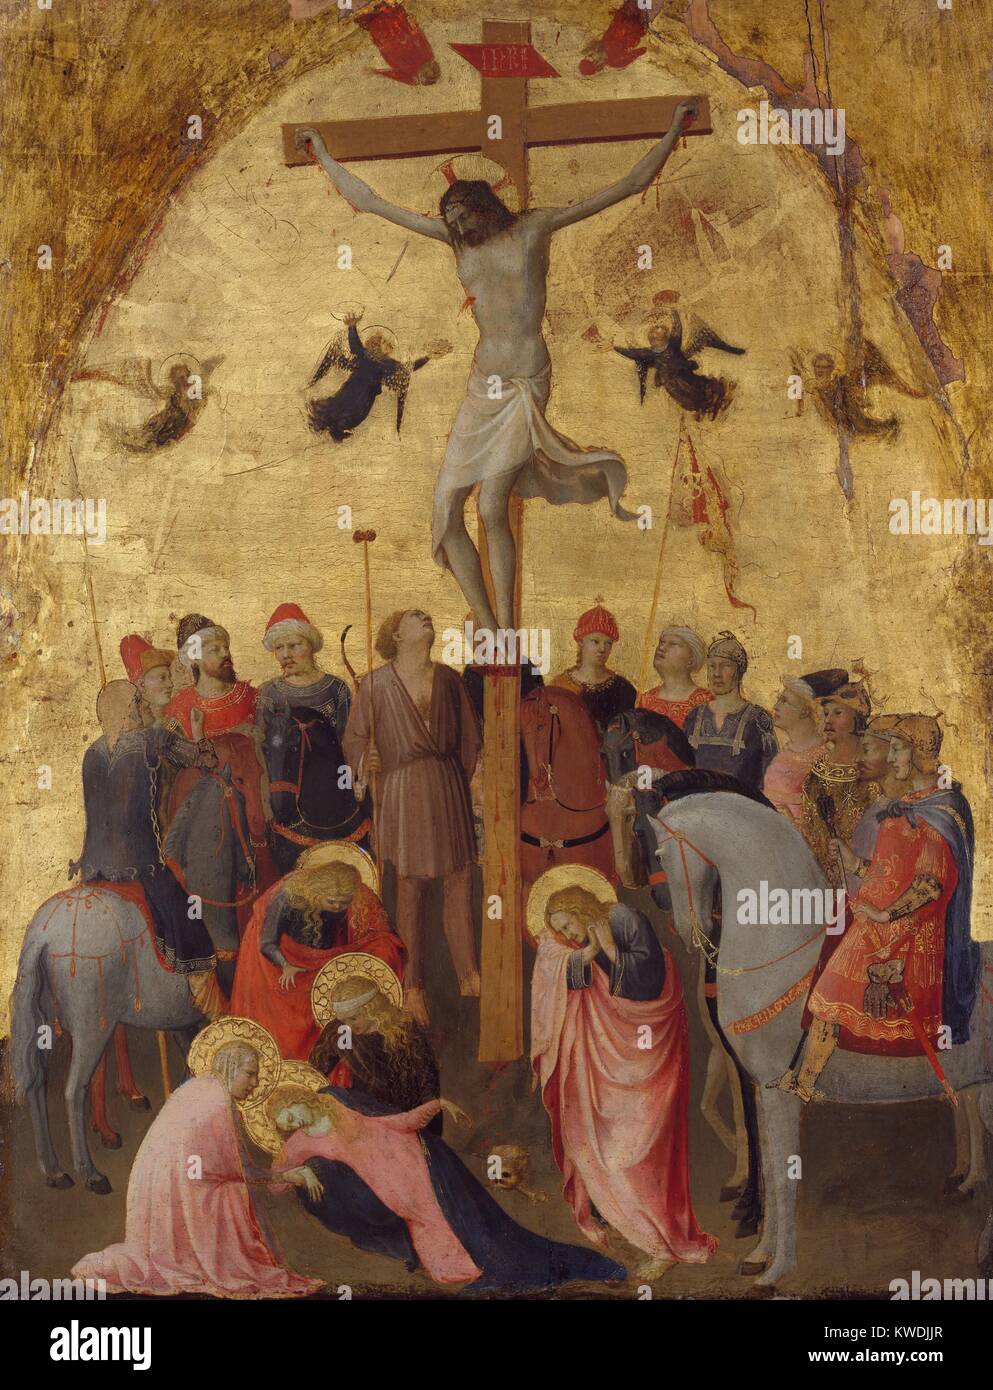 THE CRUCIFIXION, by Fra Angelico, 1420–23, Italian Renaissance painting, tempera on wood, gold ground. This Crucifixion by the Dominican friar, Fra Giovanni da Fiesole, includes human drama in the iconic scene: the Virgin, collapsed in grief; the lamenting Marys; varied attitudes of the Roman soldiers and their horses. In 1982, Pope John Paul II proclaimed Fra Angelicos beatification (BSLOC 2017 16 57) Stock Photo